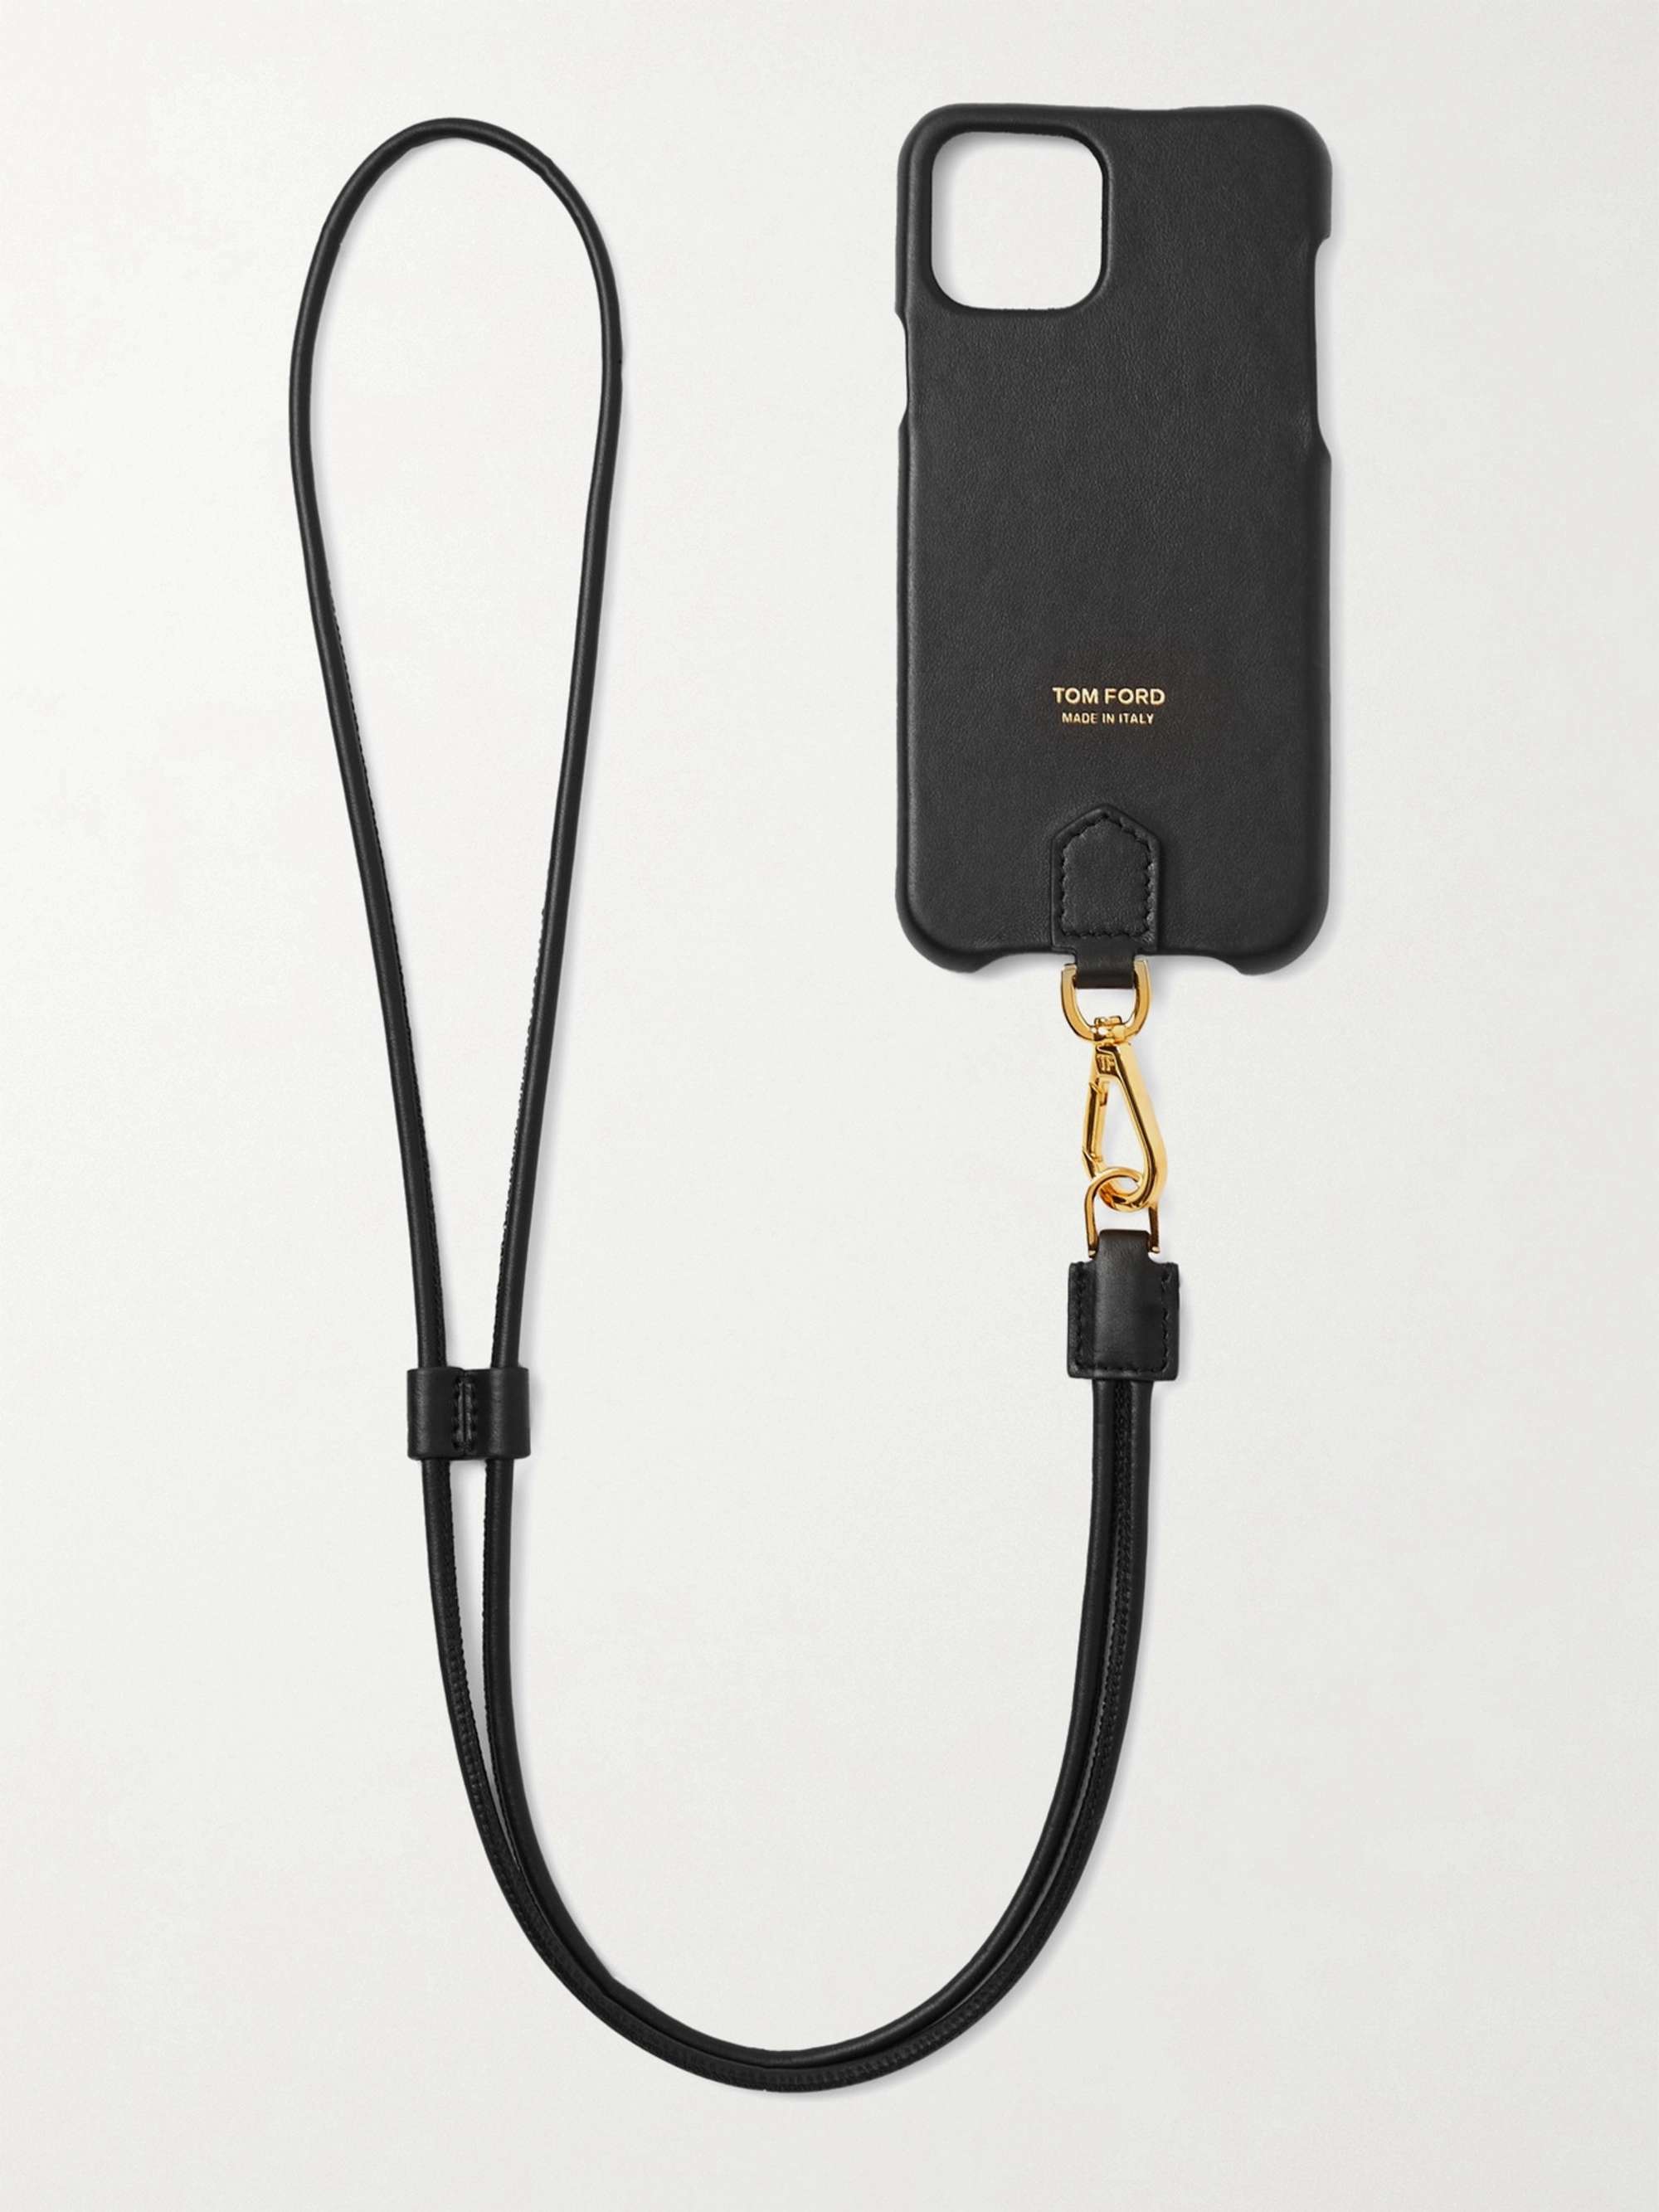 TOM FORD Logo-Print Leather iPhone 11 Pro Case with Lanyard for Men